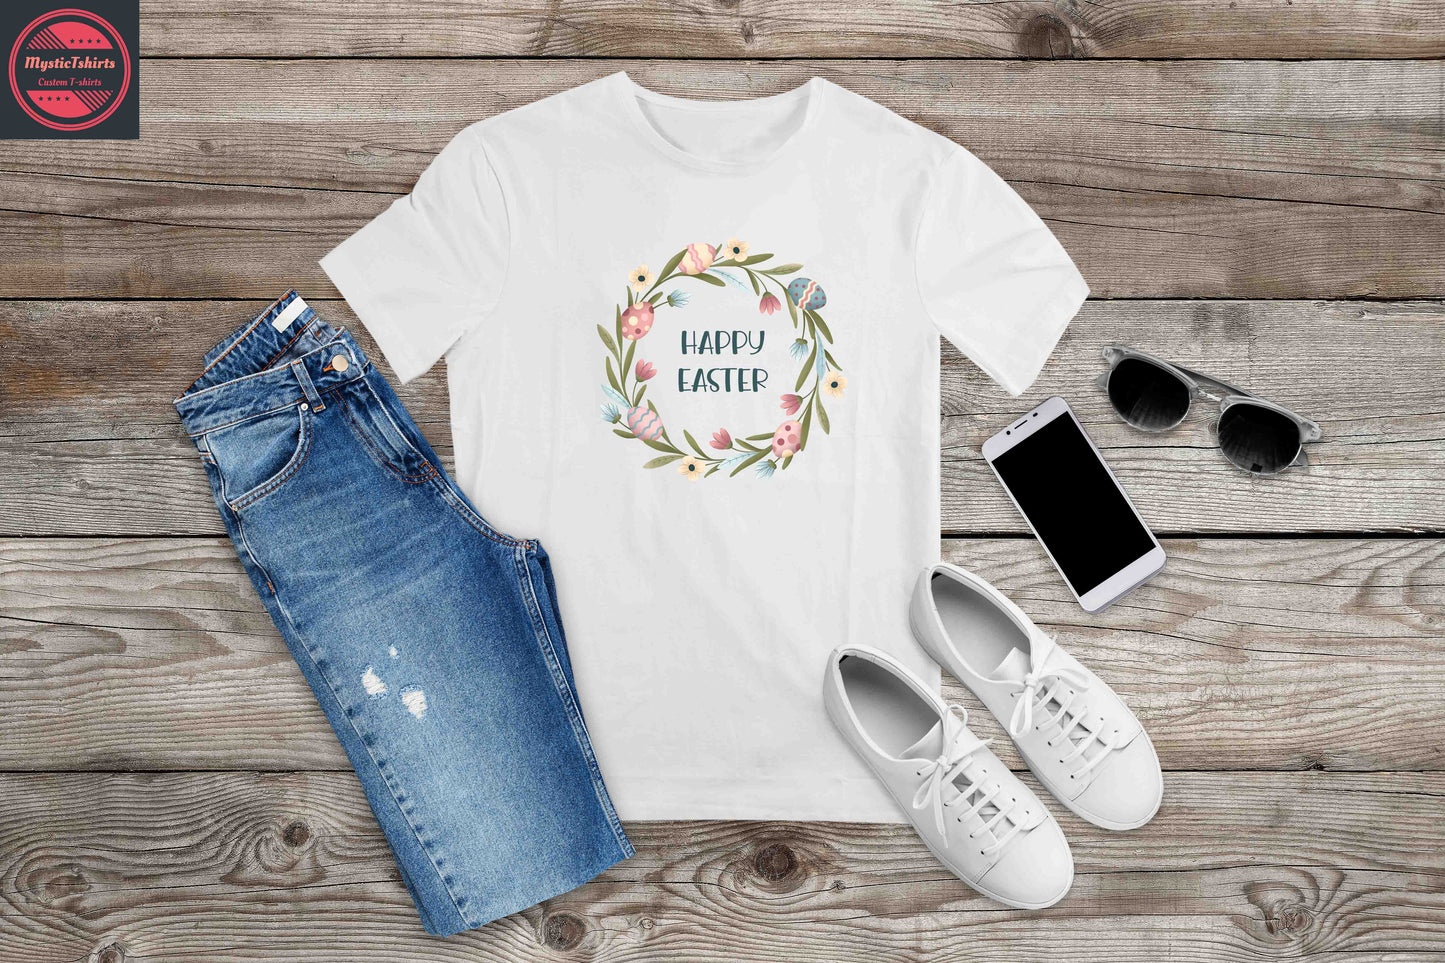 185. HAPPY EASTER, Custom Made Shirt, Personalized T-Shirt, Custom Text, Make Your Own Shirt, Custom Tee